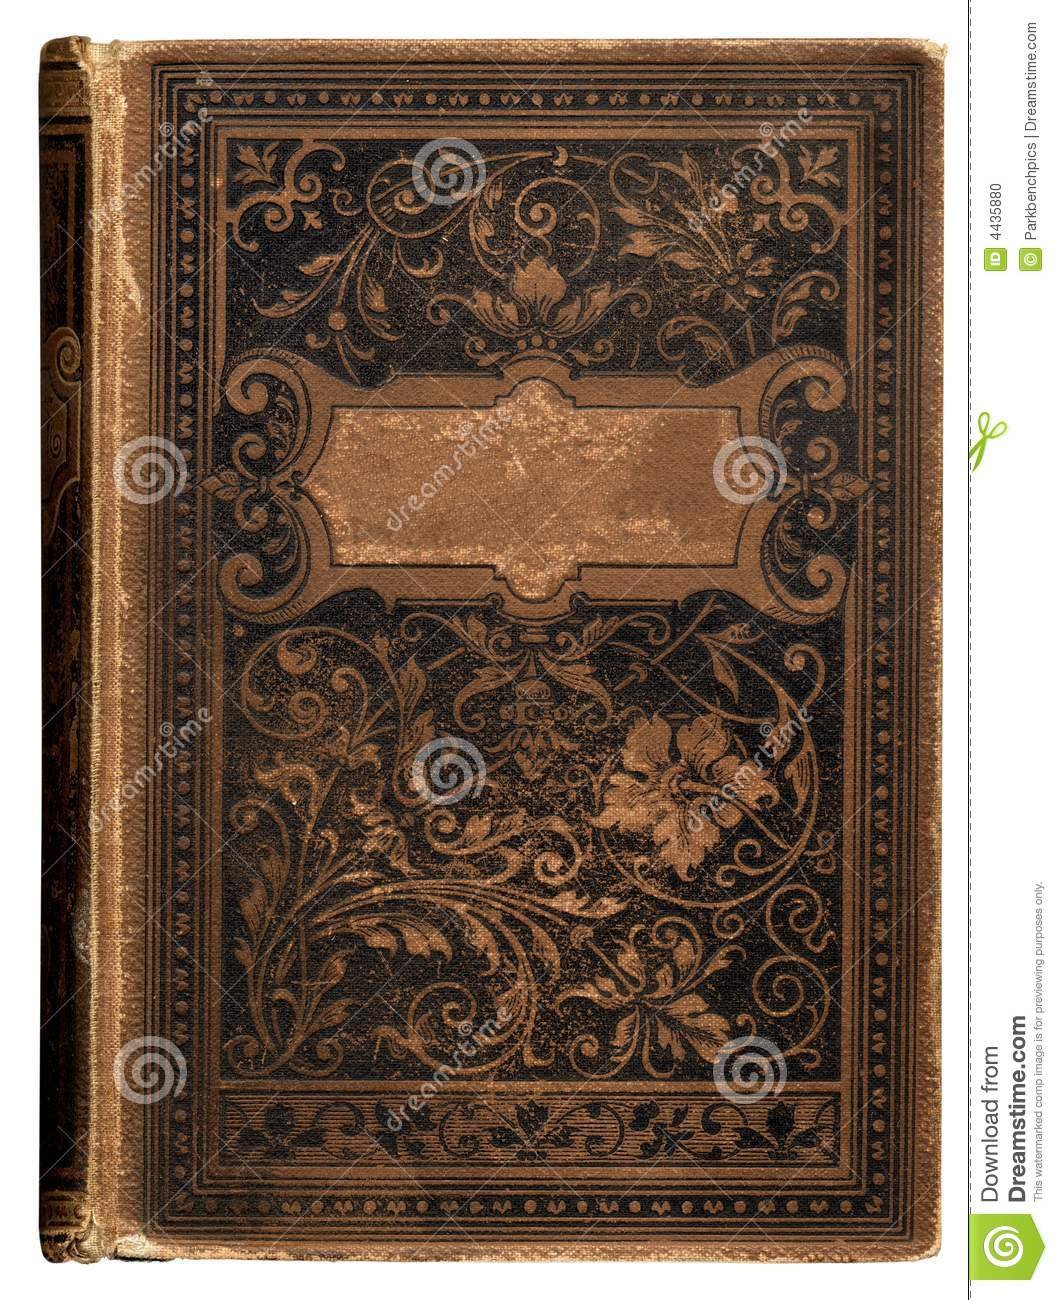 Vintage bookcover stock photo Image of flourishes